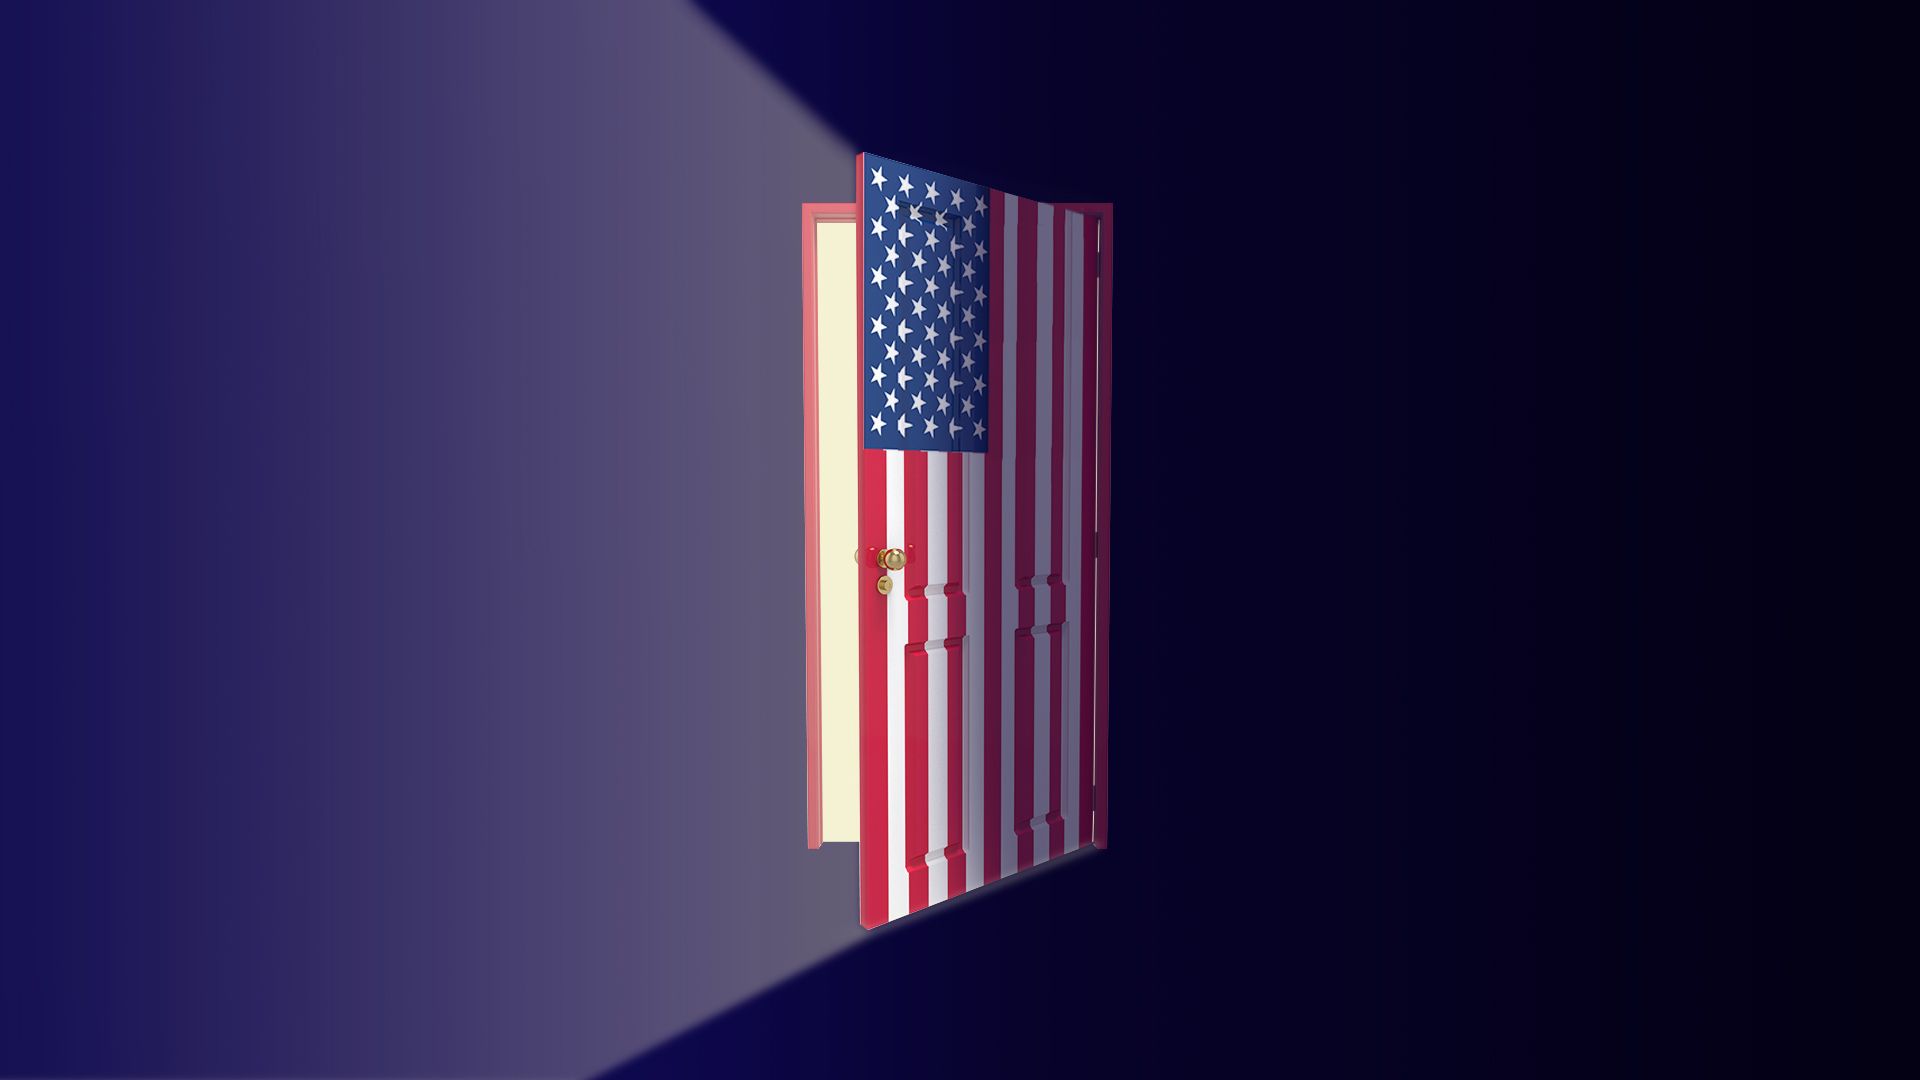 Illustration of a door made of an American flag opening with light pouring out. 